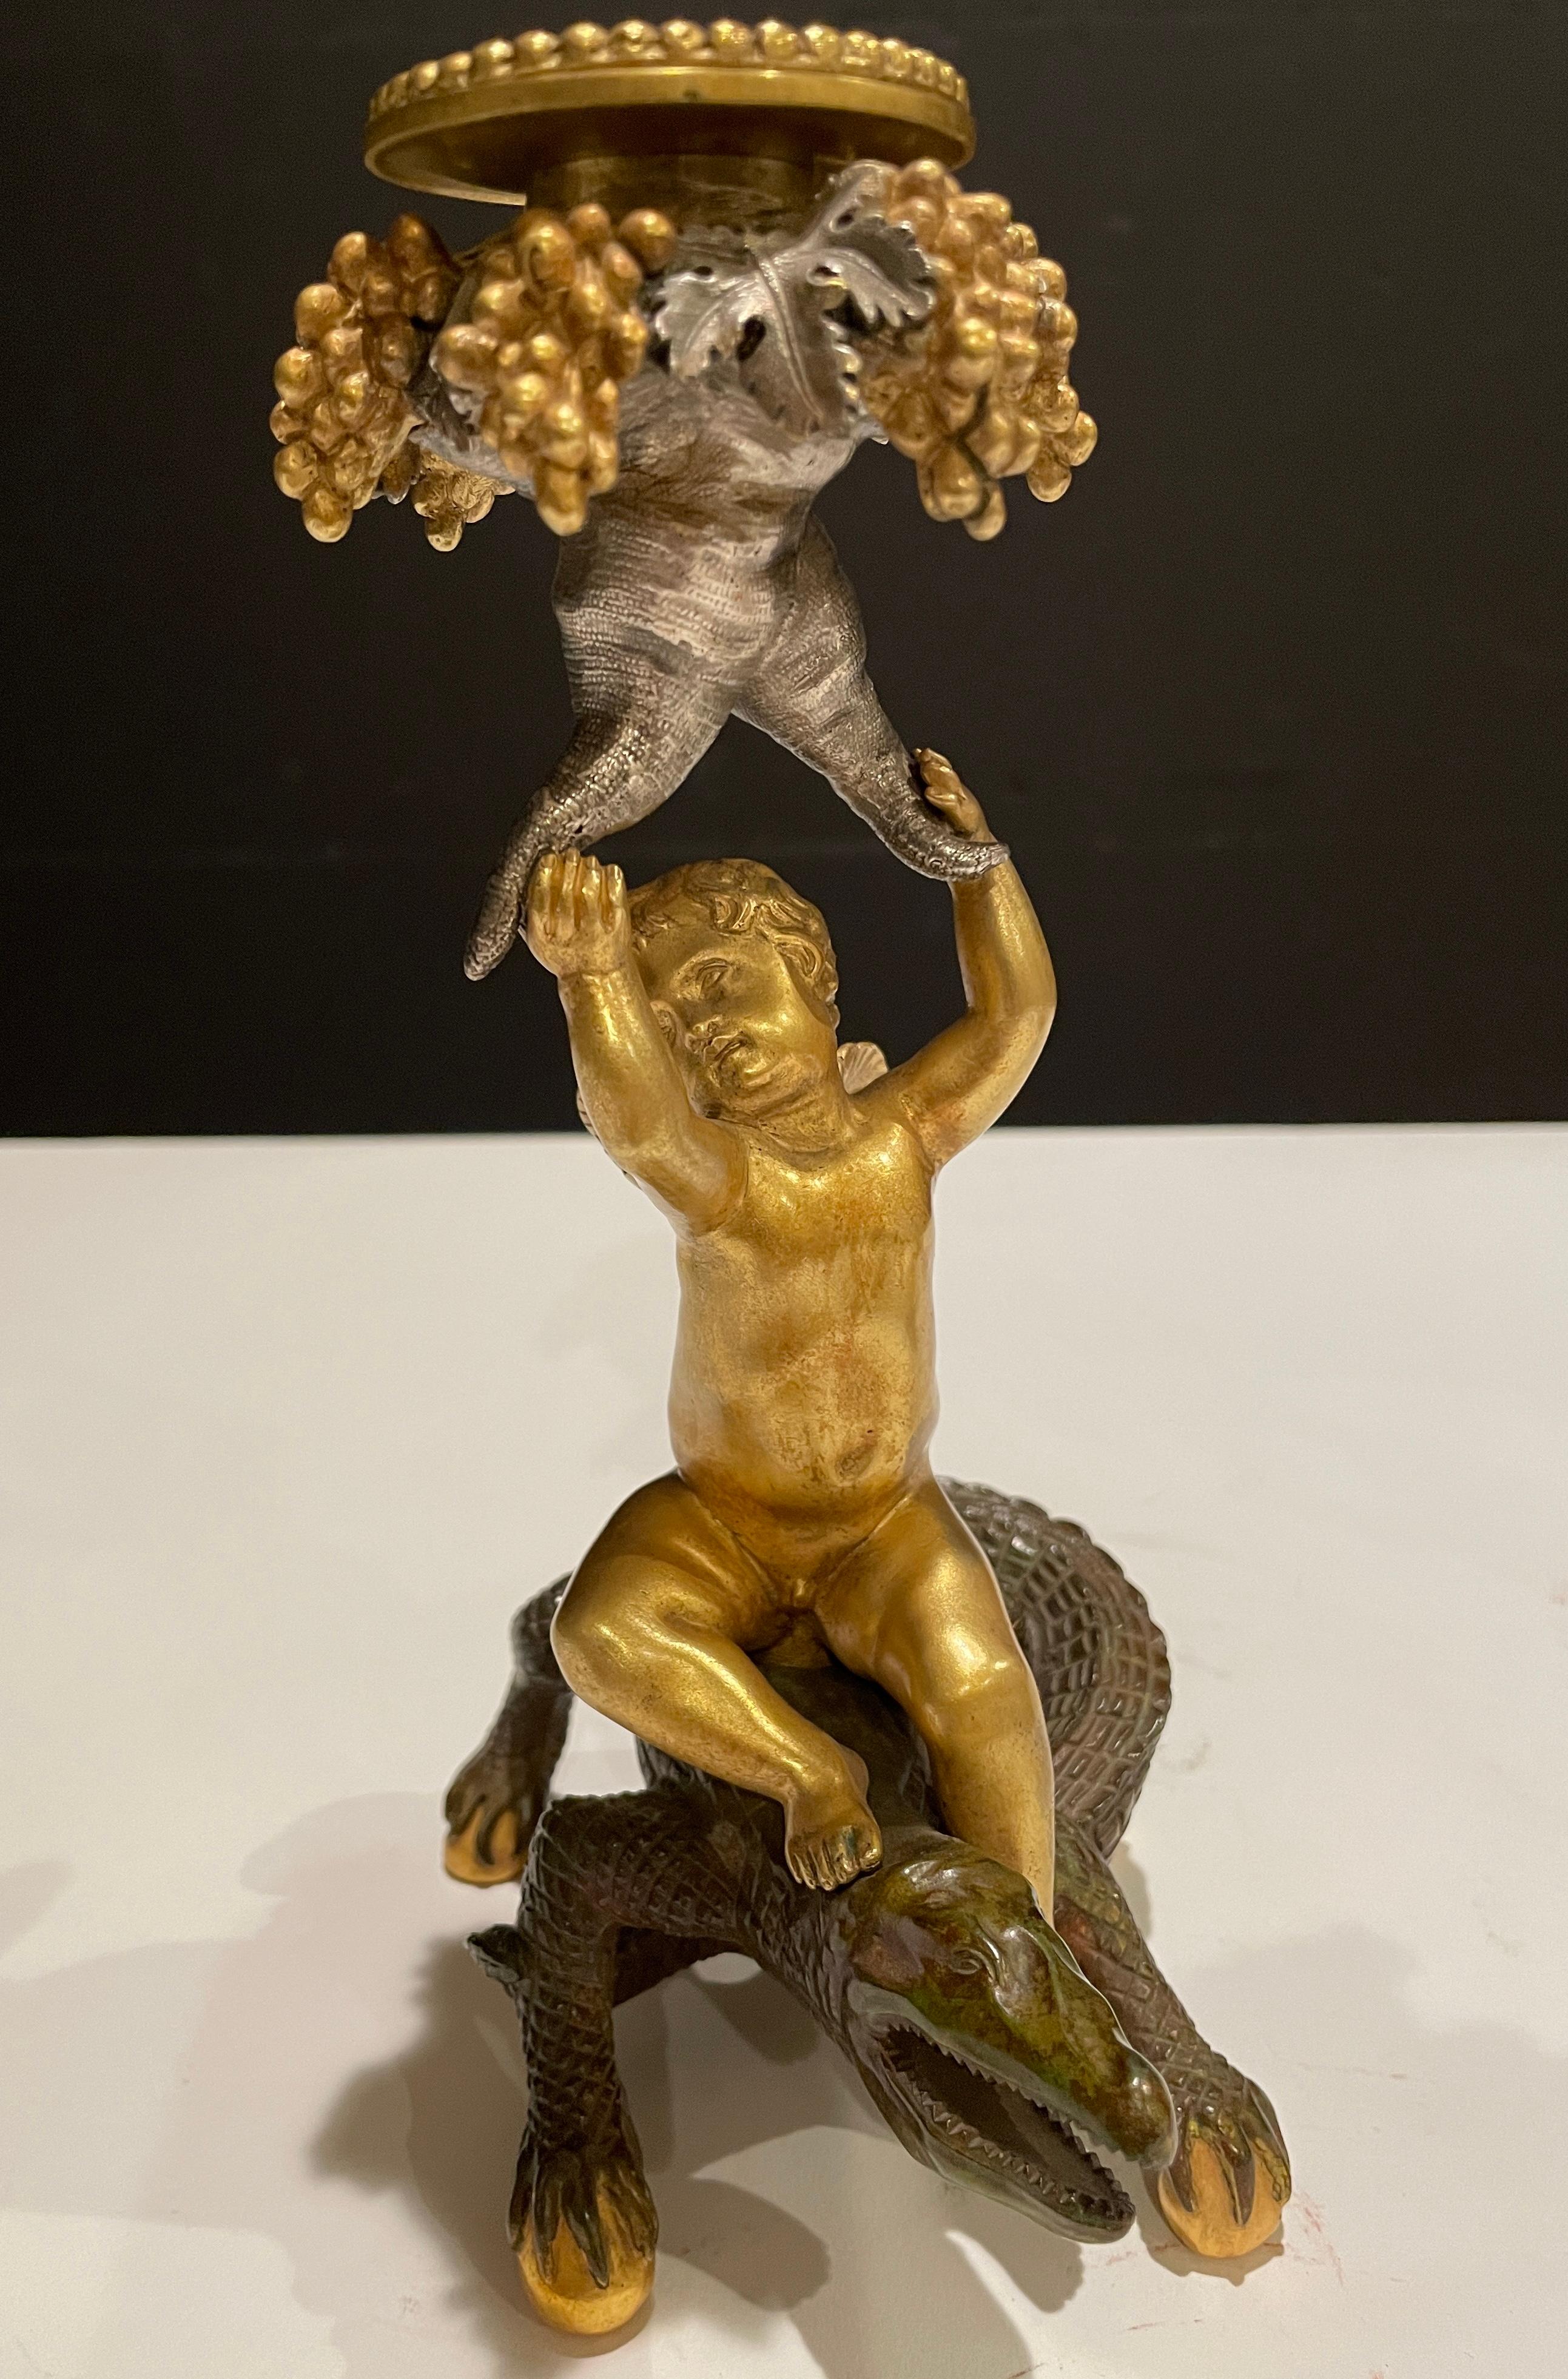 Pair of 19th century French/Austrian gilt, silvered and patinated figural exotic candlesticks. Cherub figures with angel and fairy wings seated atop a winged dragon and crocodile holding a cornucopia of grapes, vines and leaves.